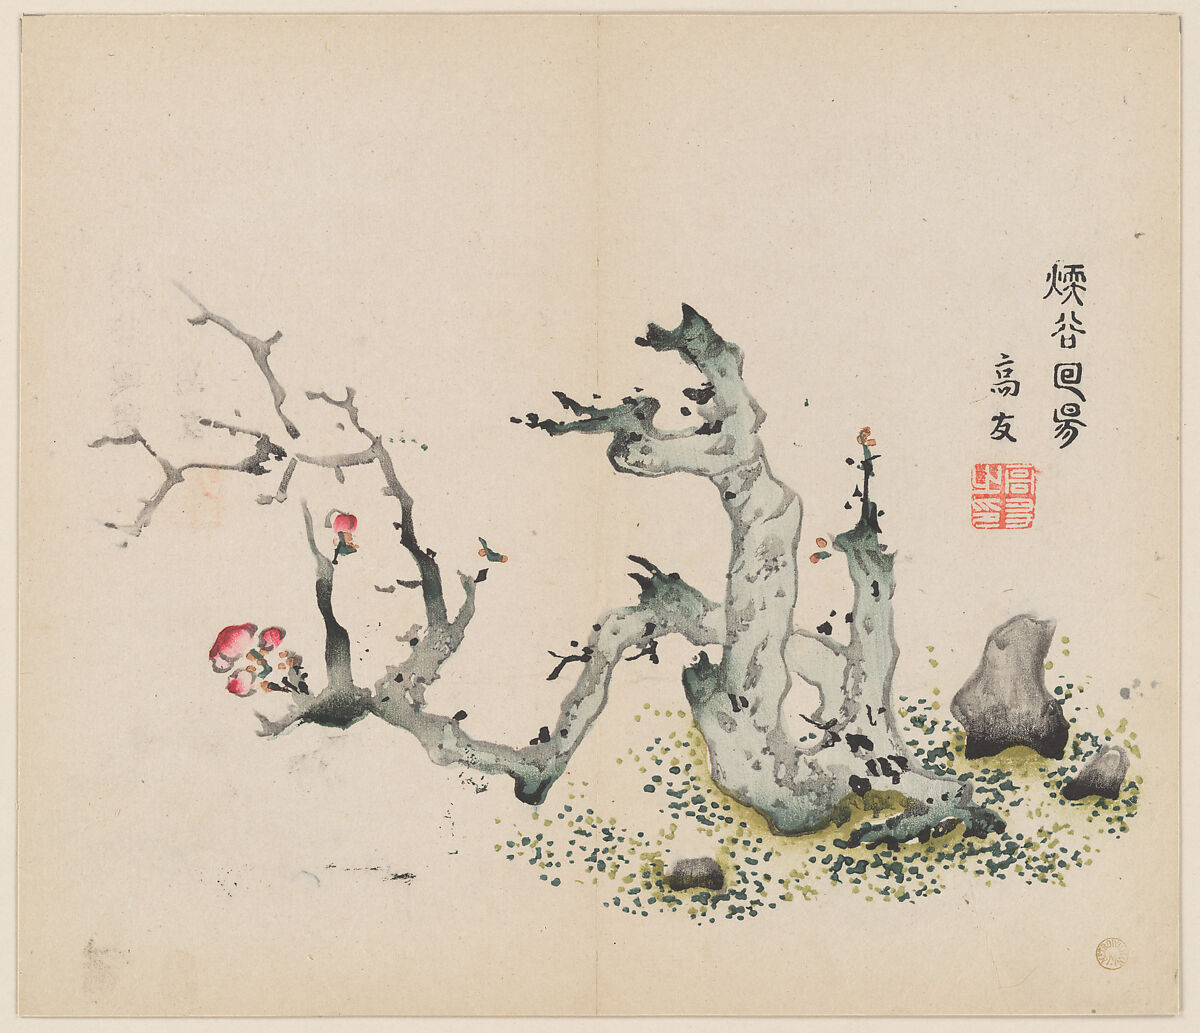 Page from the Ten Bamboo Studio Manual of Painting and Calligraphy, Hu Zhengyan, Individual leaf from a printed book; ink and color on paper, China